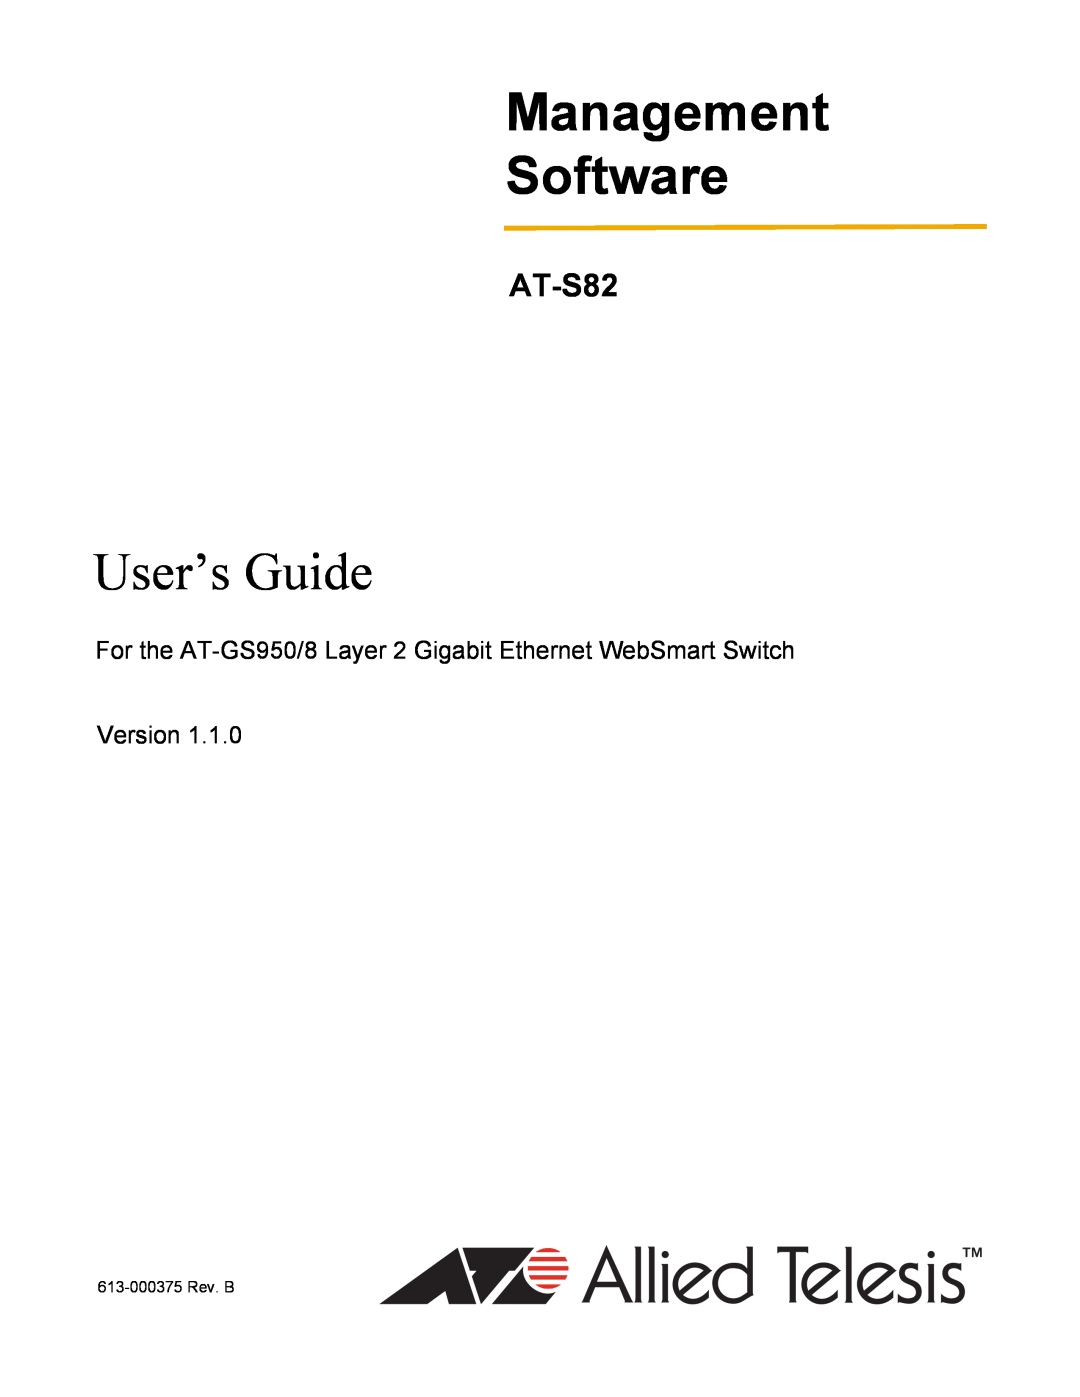 Allied Telesis AT-GS950/8 manual Management Software, User’s Guide, AT-S82 